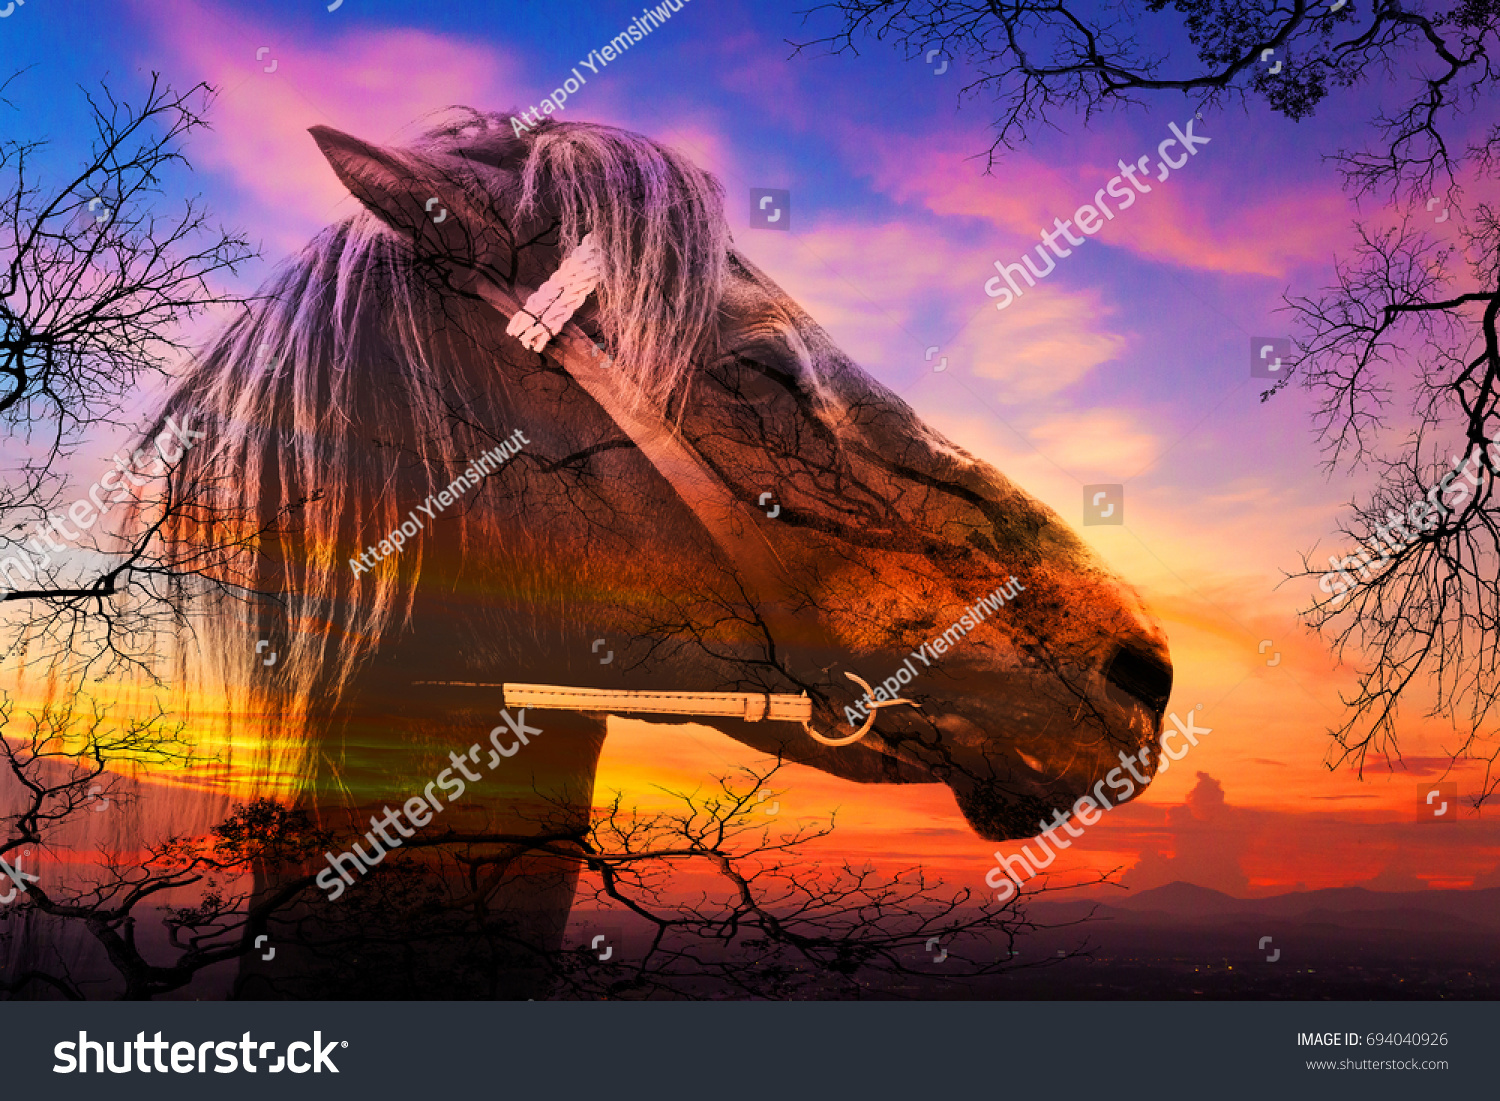 Double exposure of a horse and trees on sky sunset  #694040926